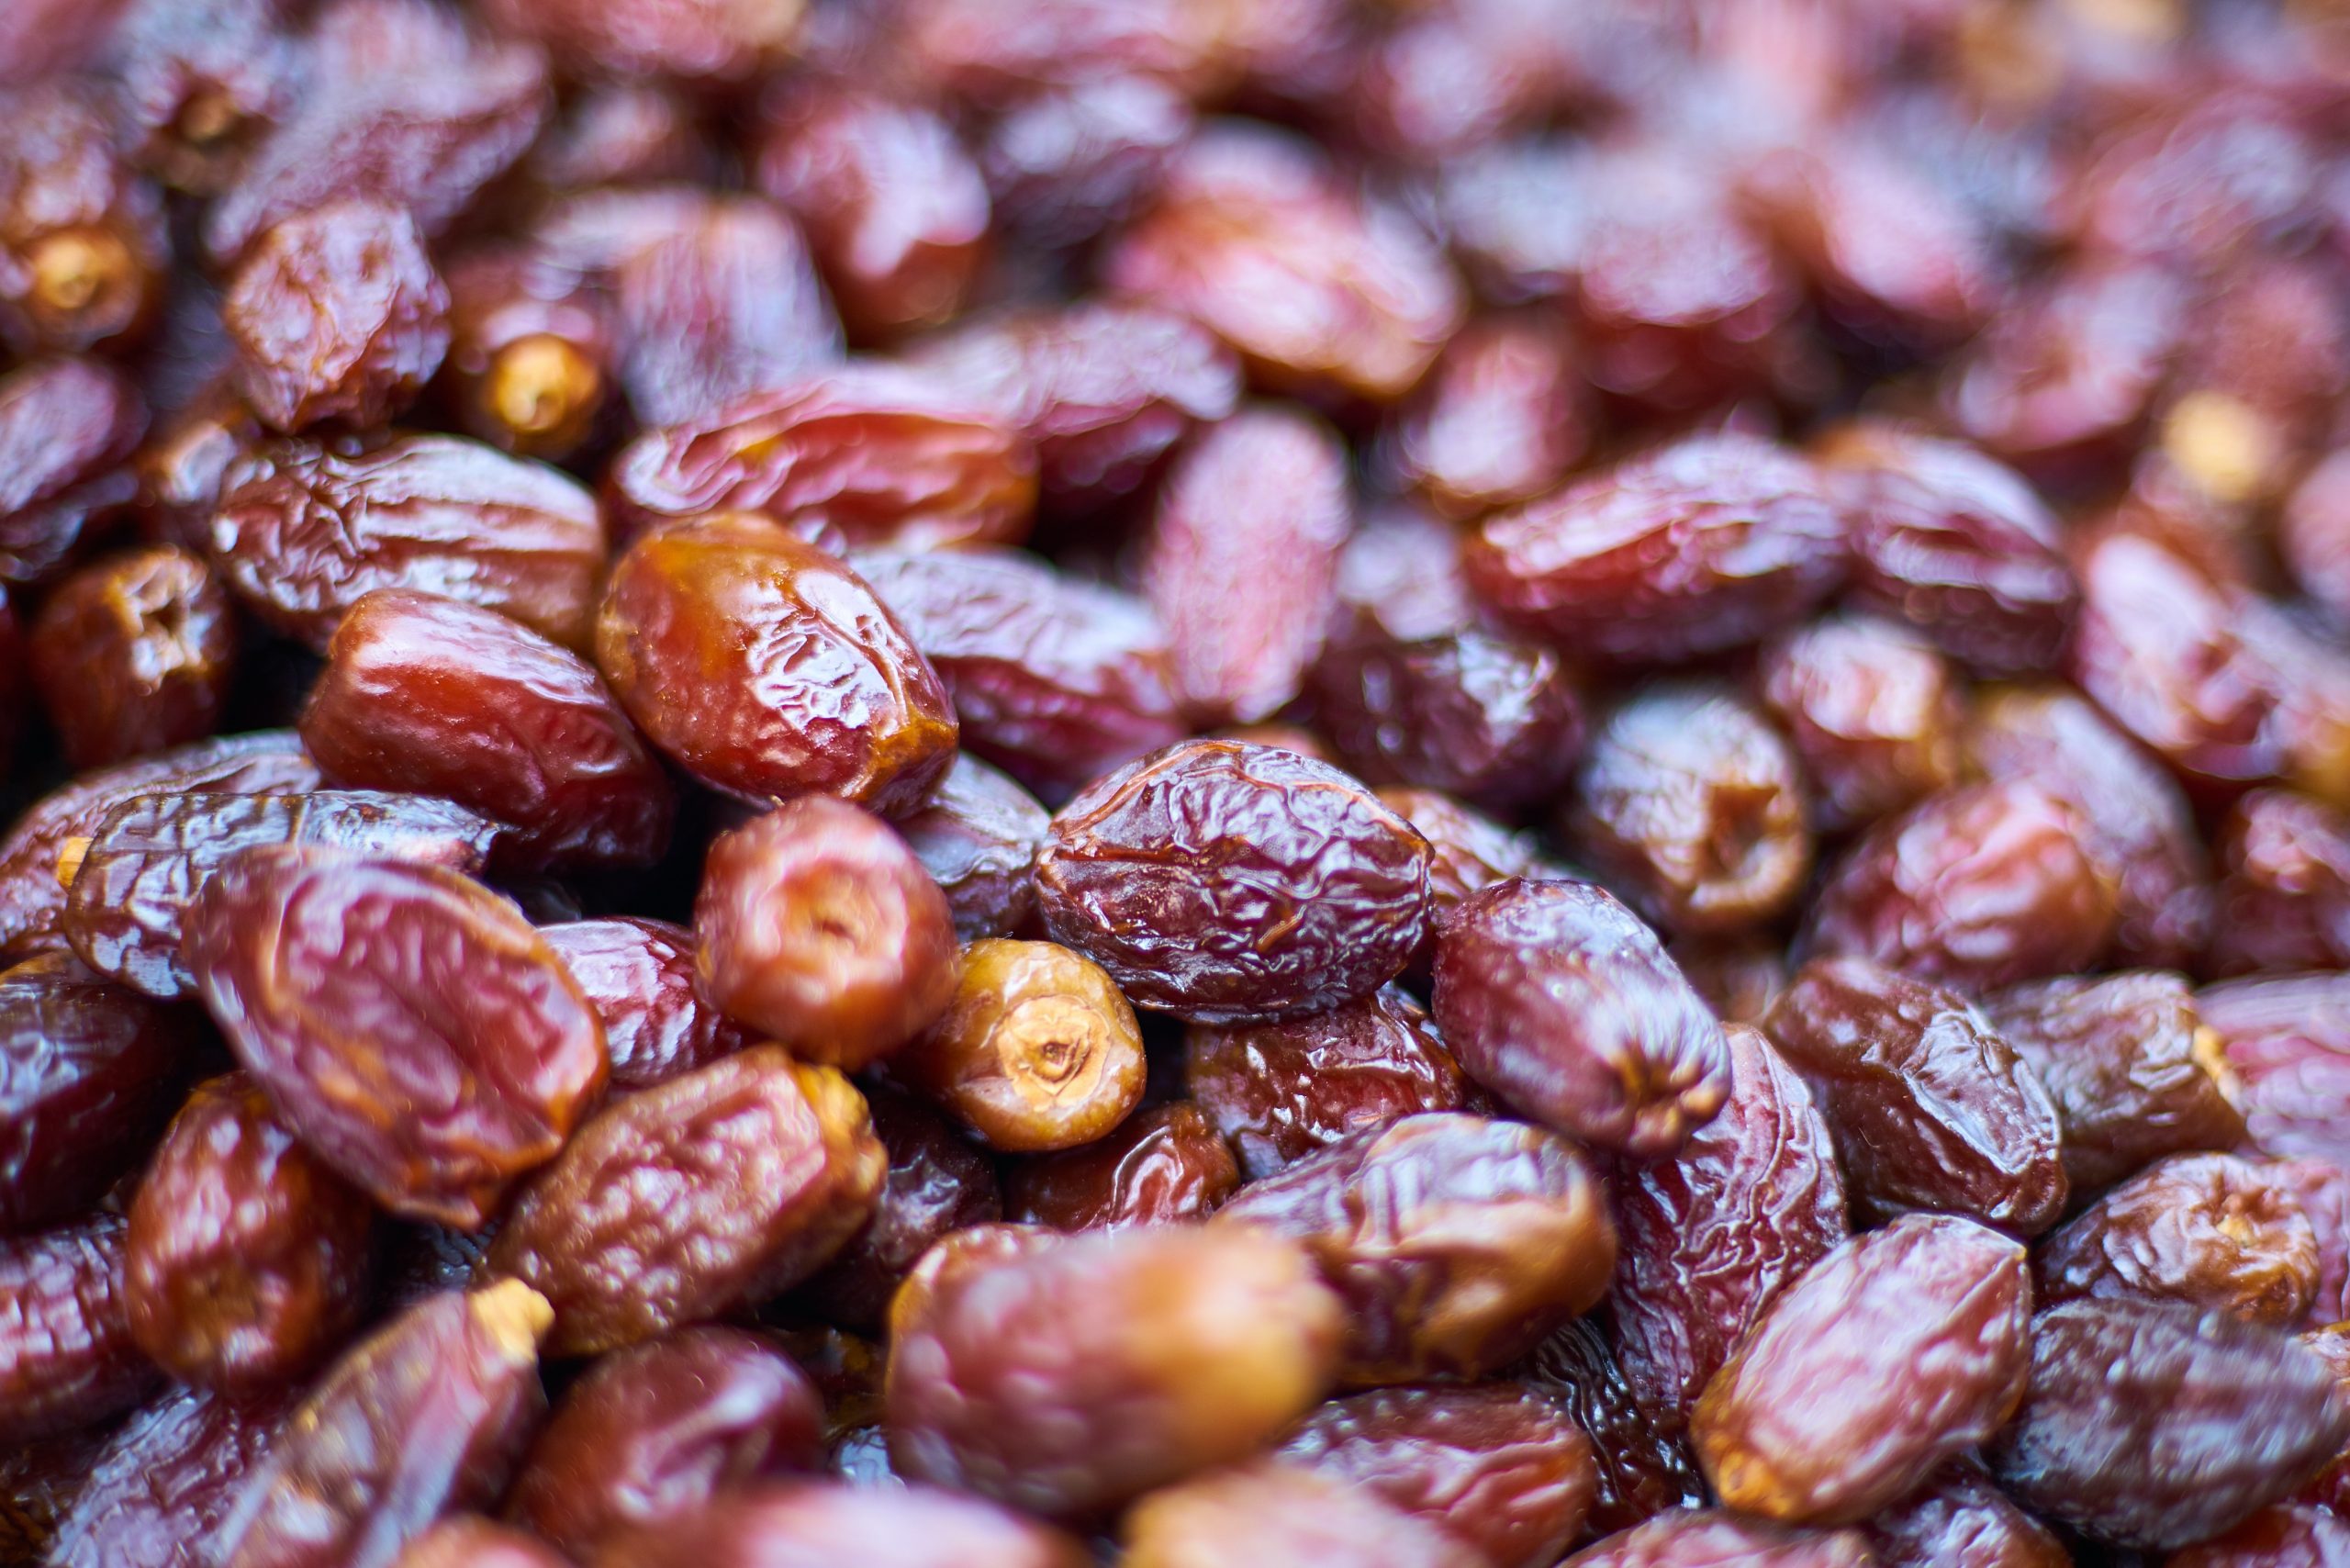 Saudi date export ranks globally with value of 318.9 bln USD in 2021